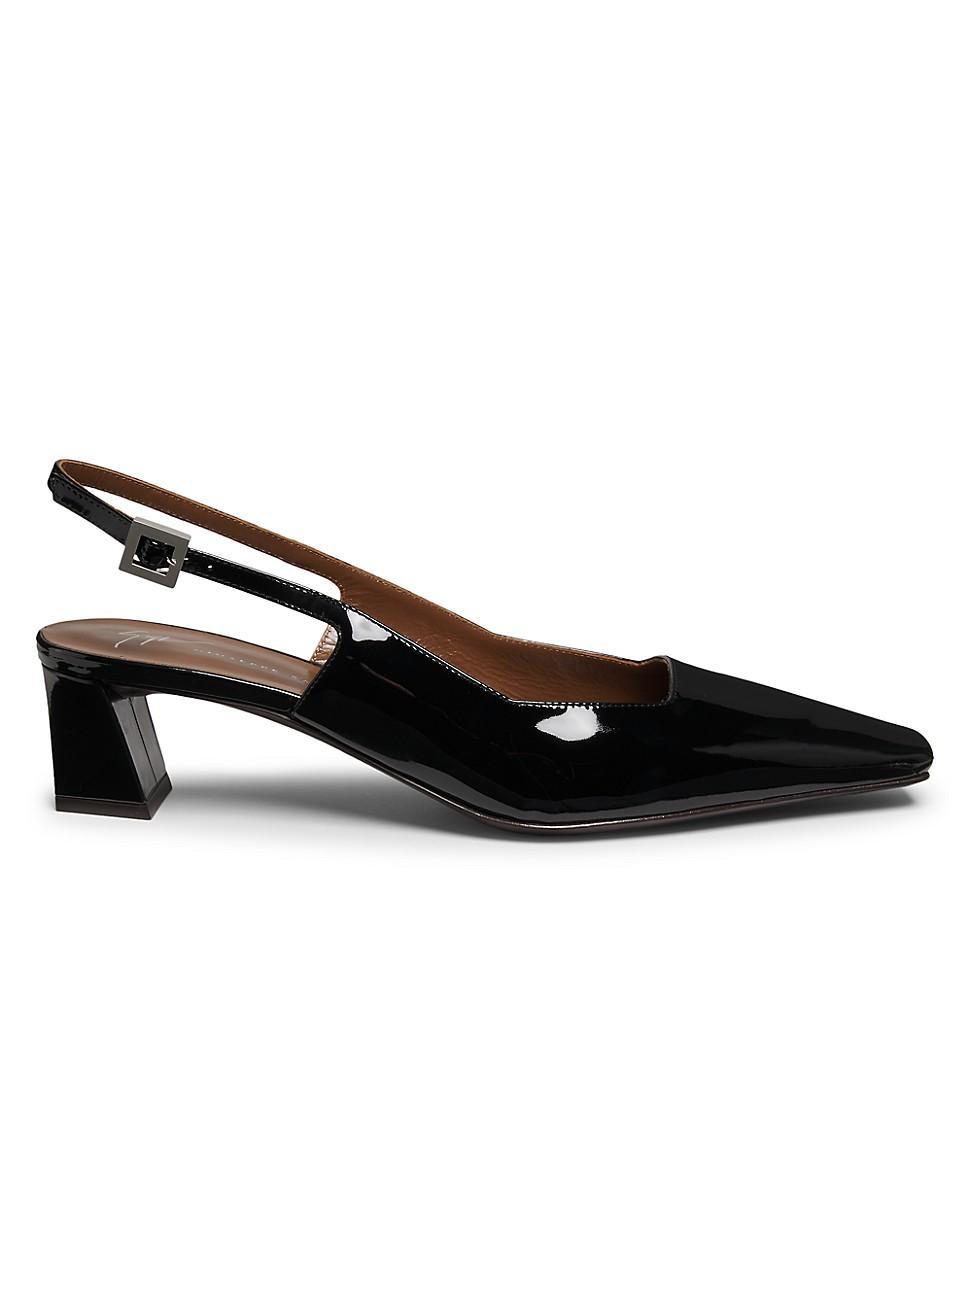 Womens Brenda 45MM Patent Leather Slingback Pumps Product Image